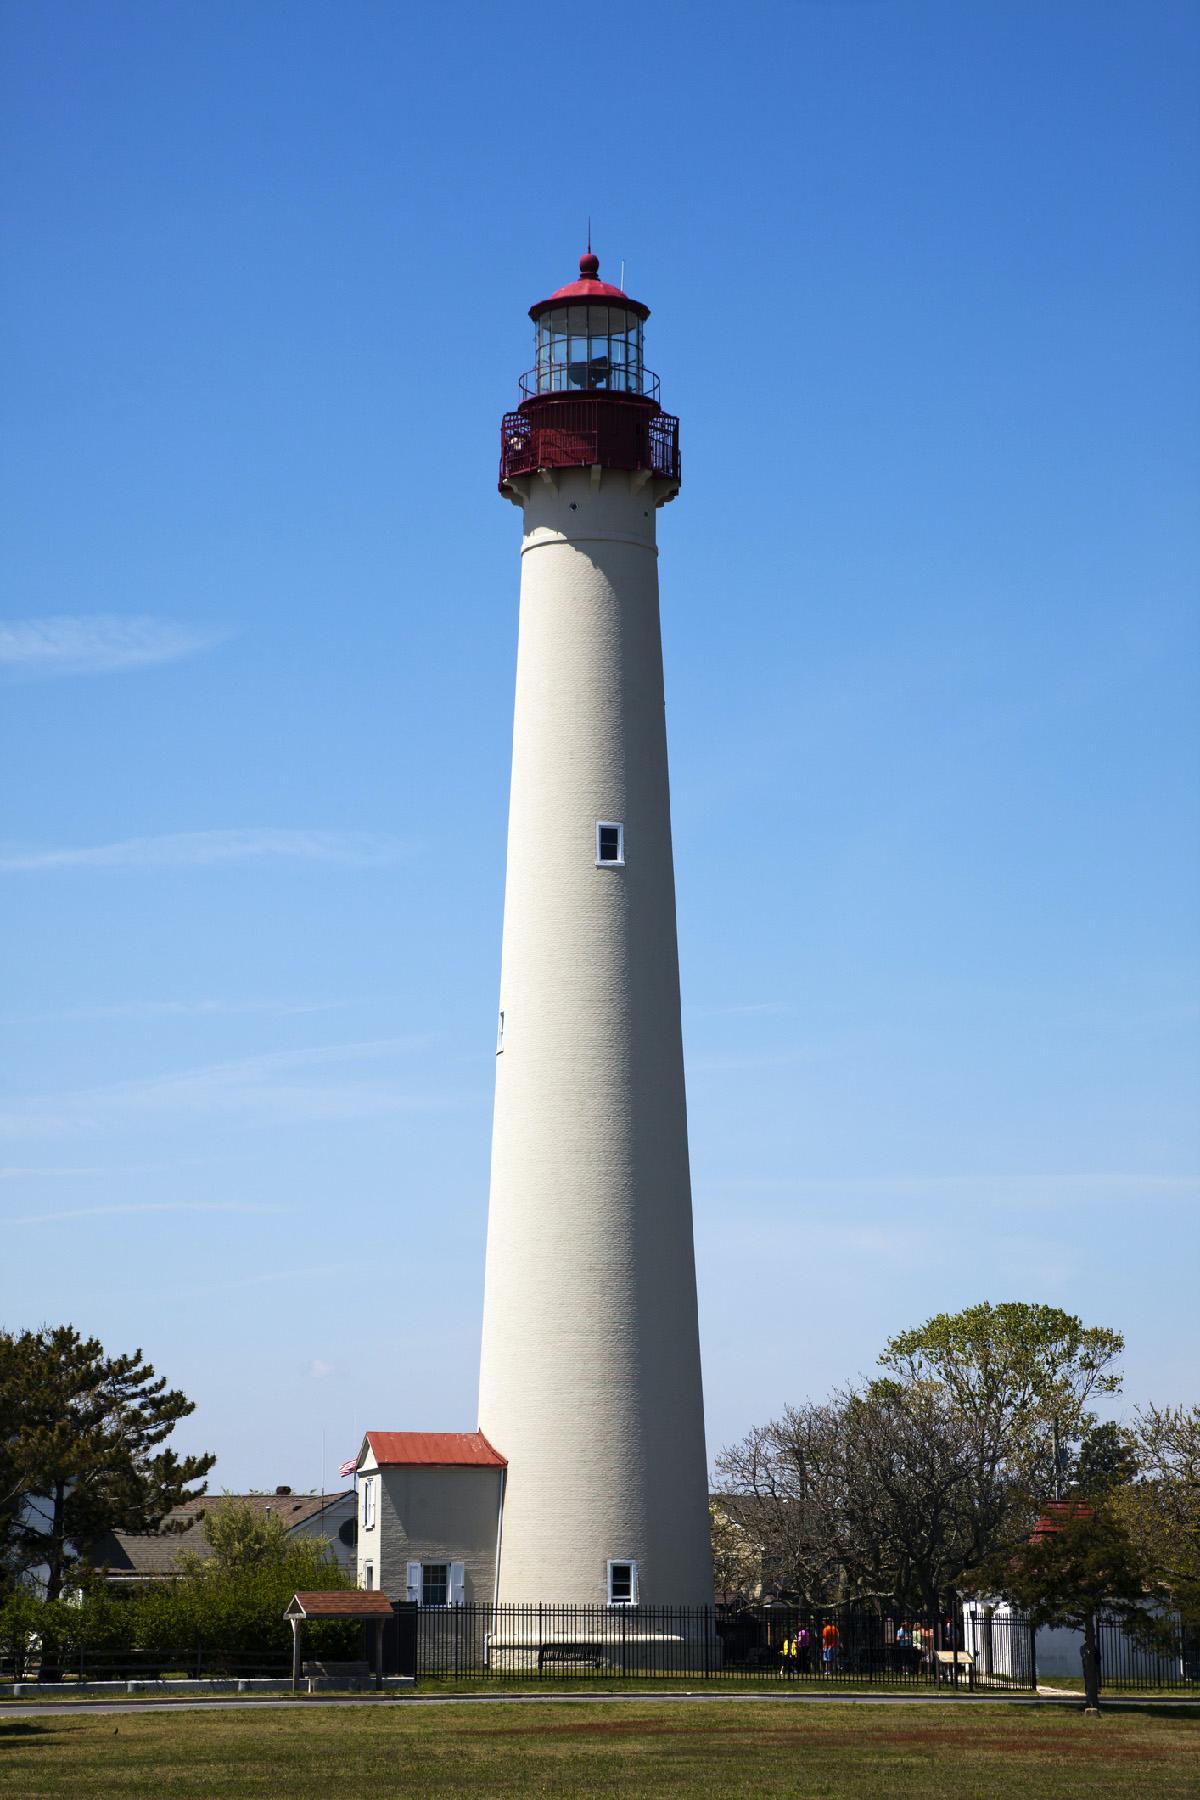 The Cape May Lighthouse in Cape May, New Jersey, has been sending out beacons to ships since 1859. (Photo courtesy of Sylvana Rega/Dreamstime.com)